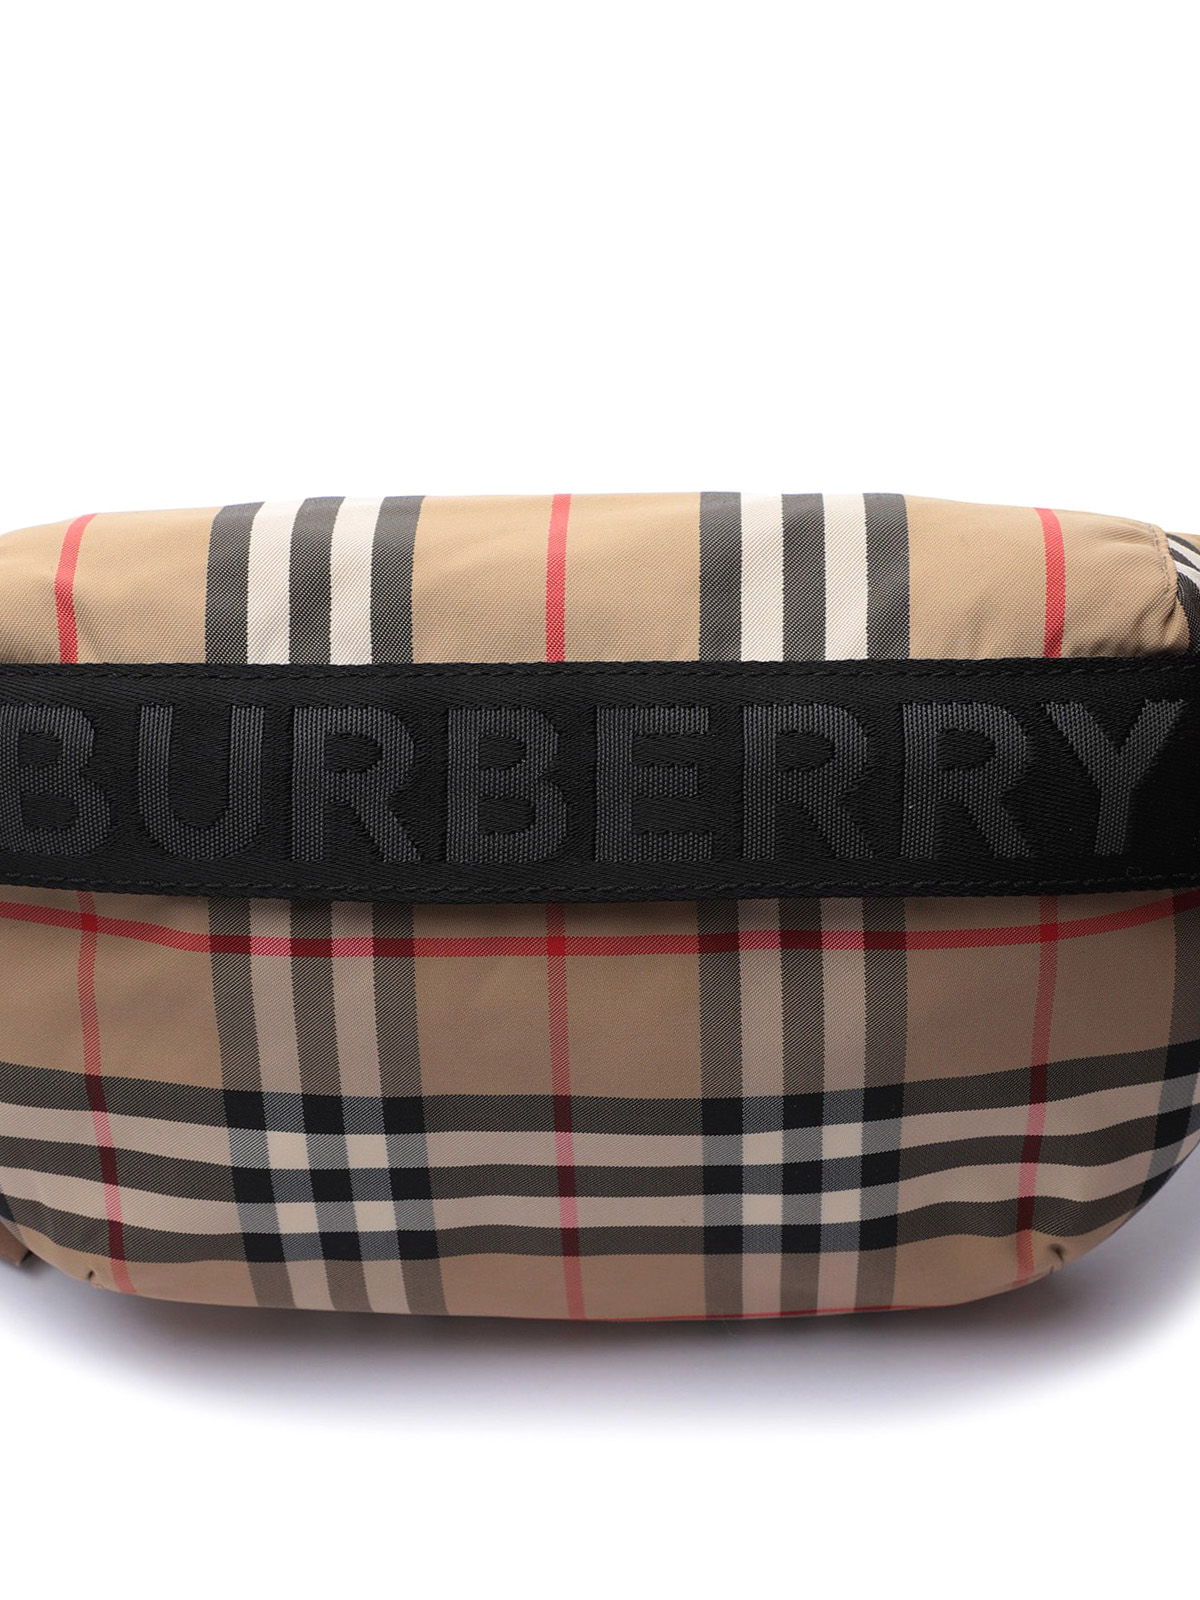 BURBERRY: Sonny Vintage Check pouch in nylon - Beige